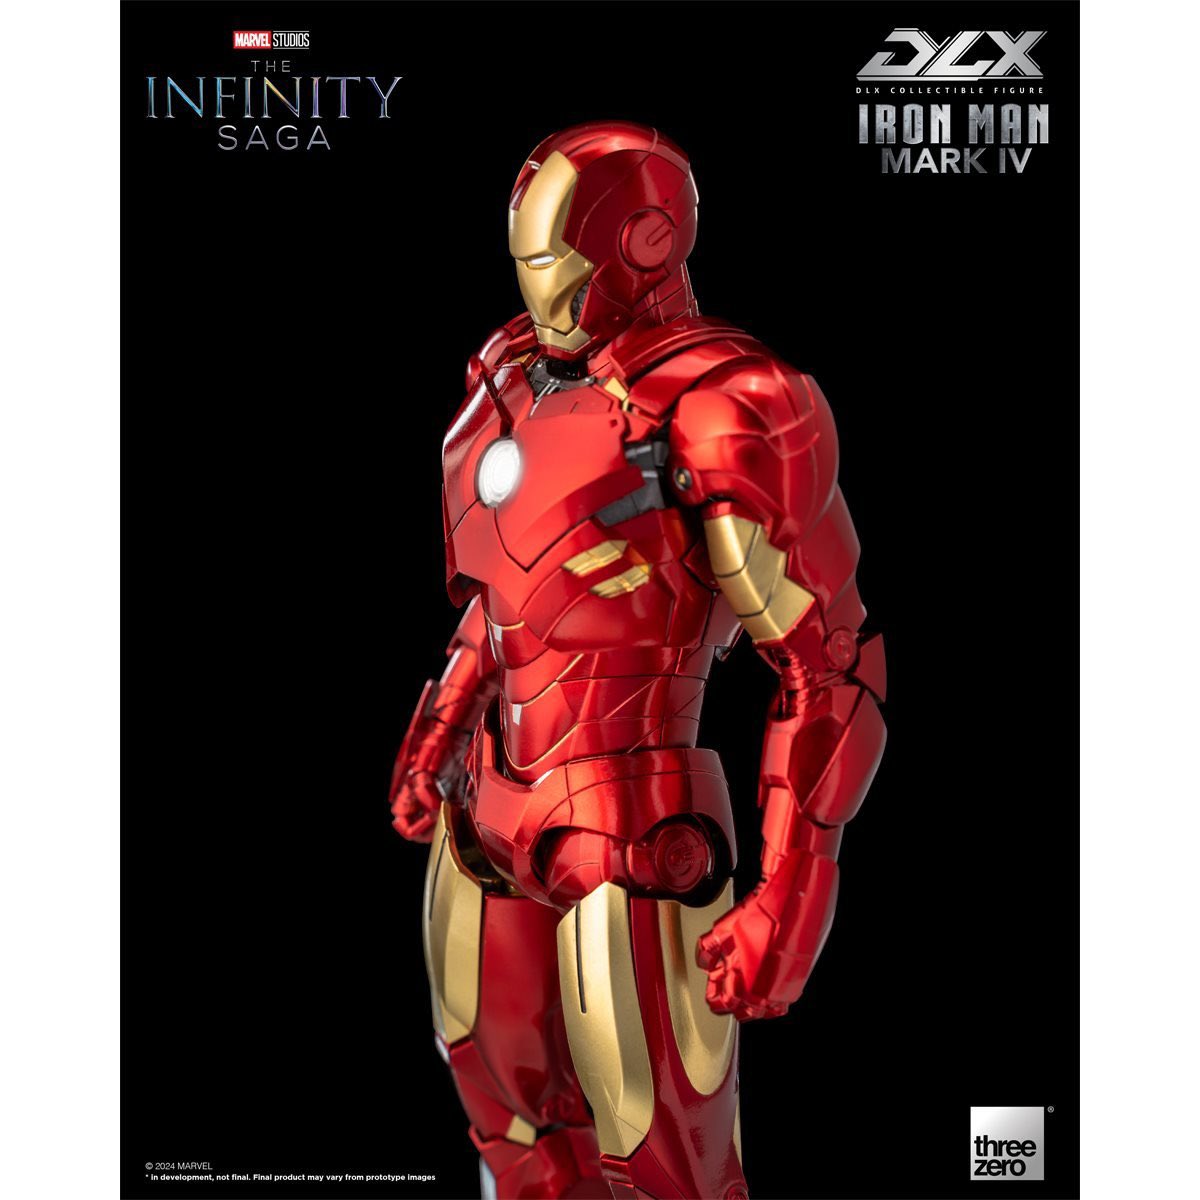 Iron Man Mark IV by threezero is available for preorder!

Link: ee.toys/989Z89

#ActionFigure #ActionFigures #threezero